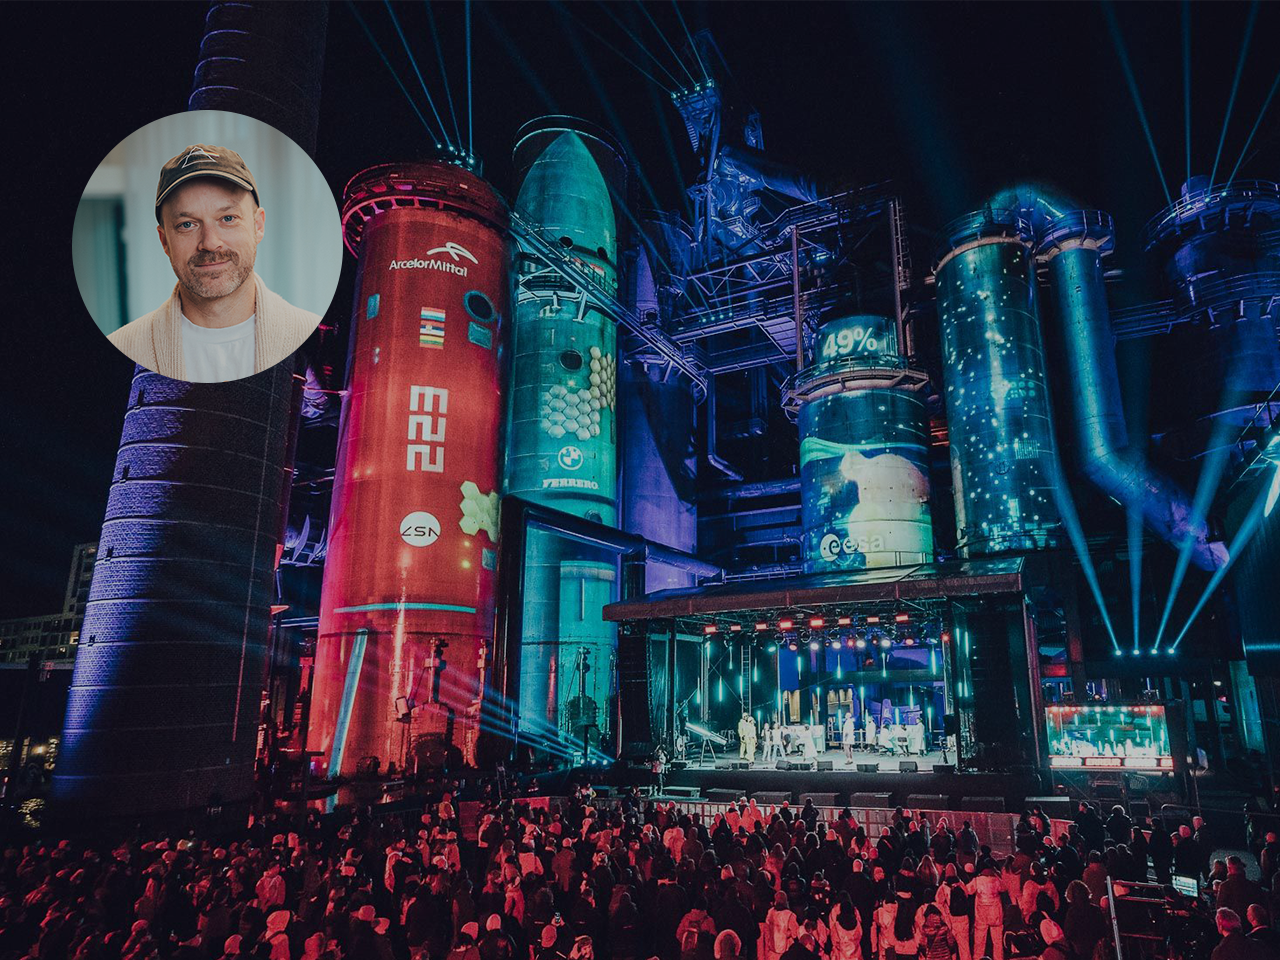 Crowd stands in front of a stage in an illuminated industrial area at Esch2022 Opening Ceremony organized by Battle Royal Studios with Brendan Shelper